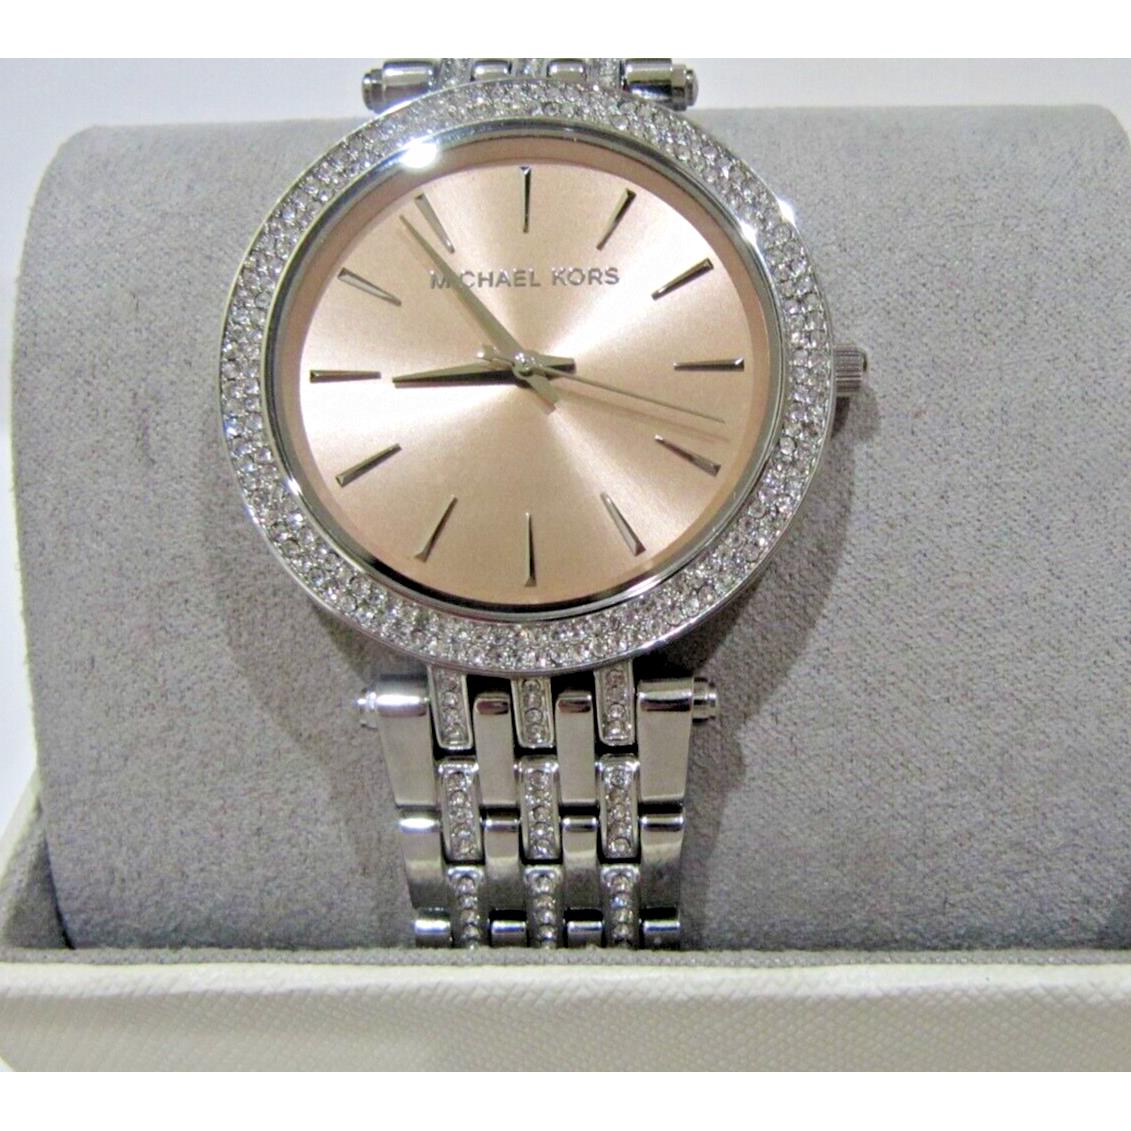 Michael Kors watch Darci - Pink Face, Pink Dial, Silver Band 3